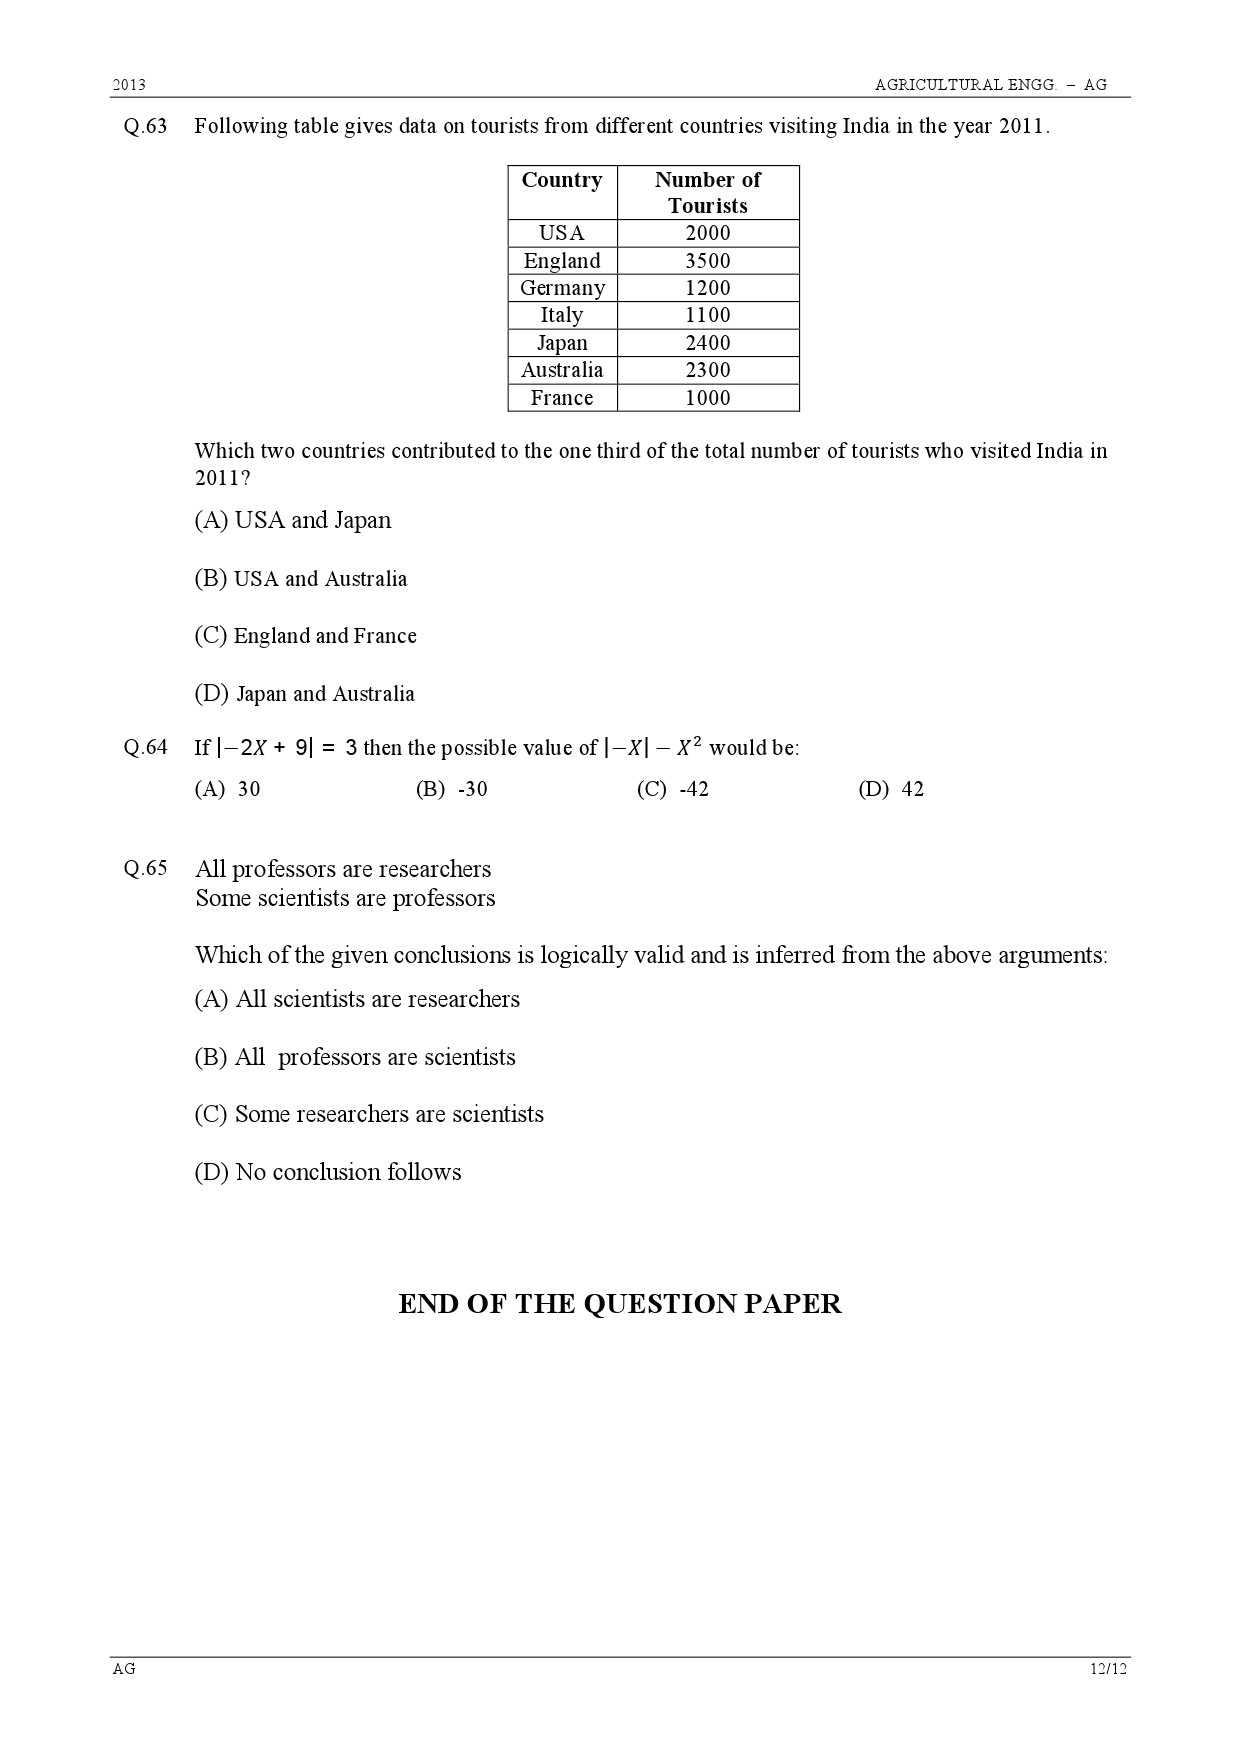 GATE Exam Question Paper 2013 Agricultural Engineering 12